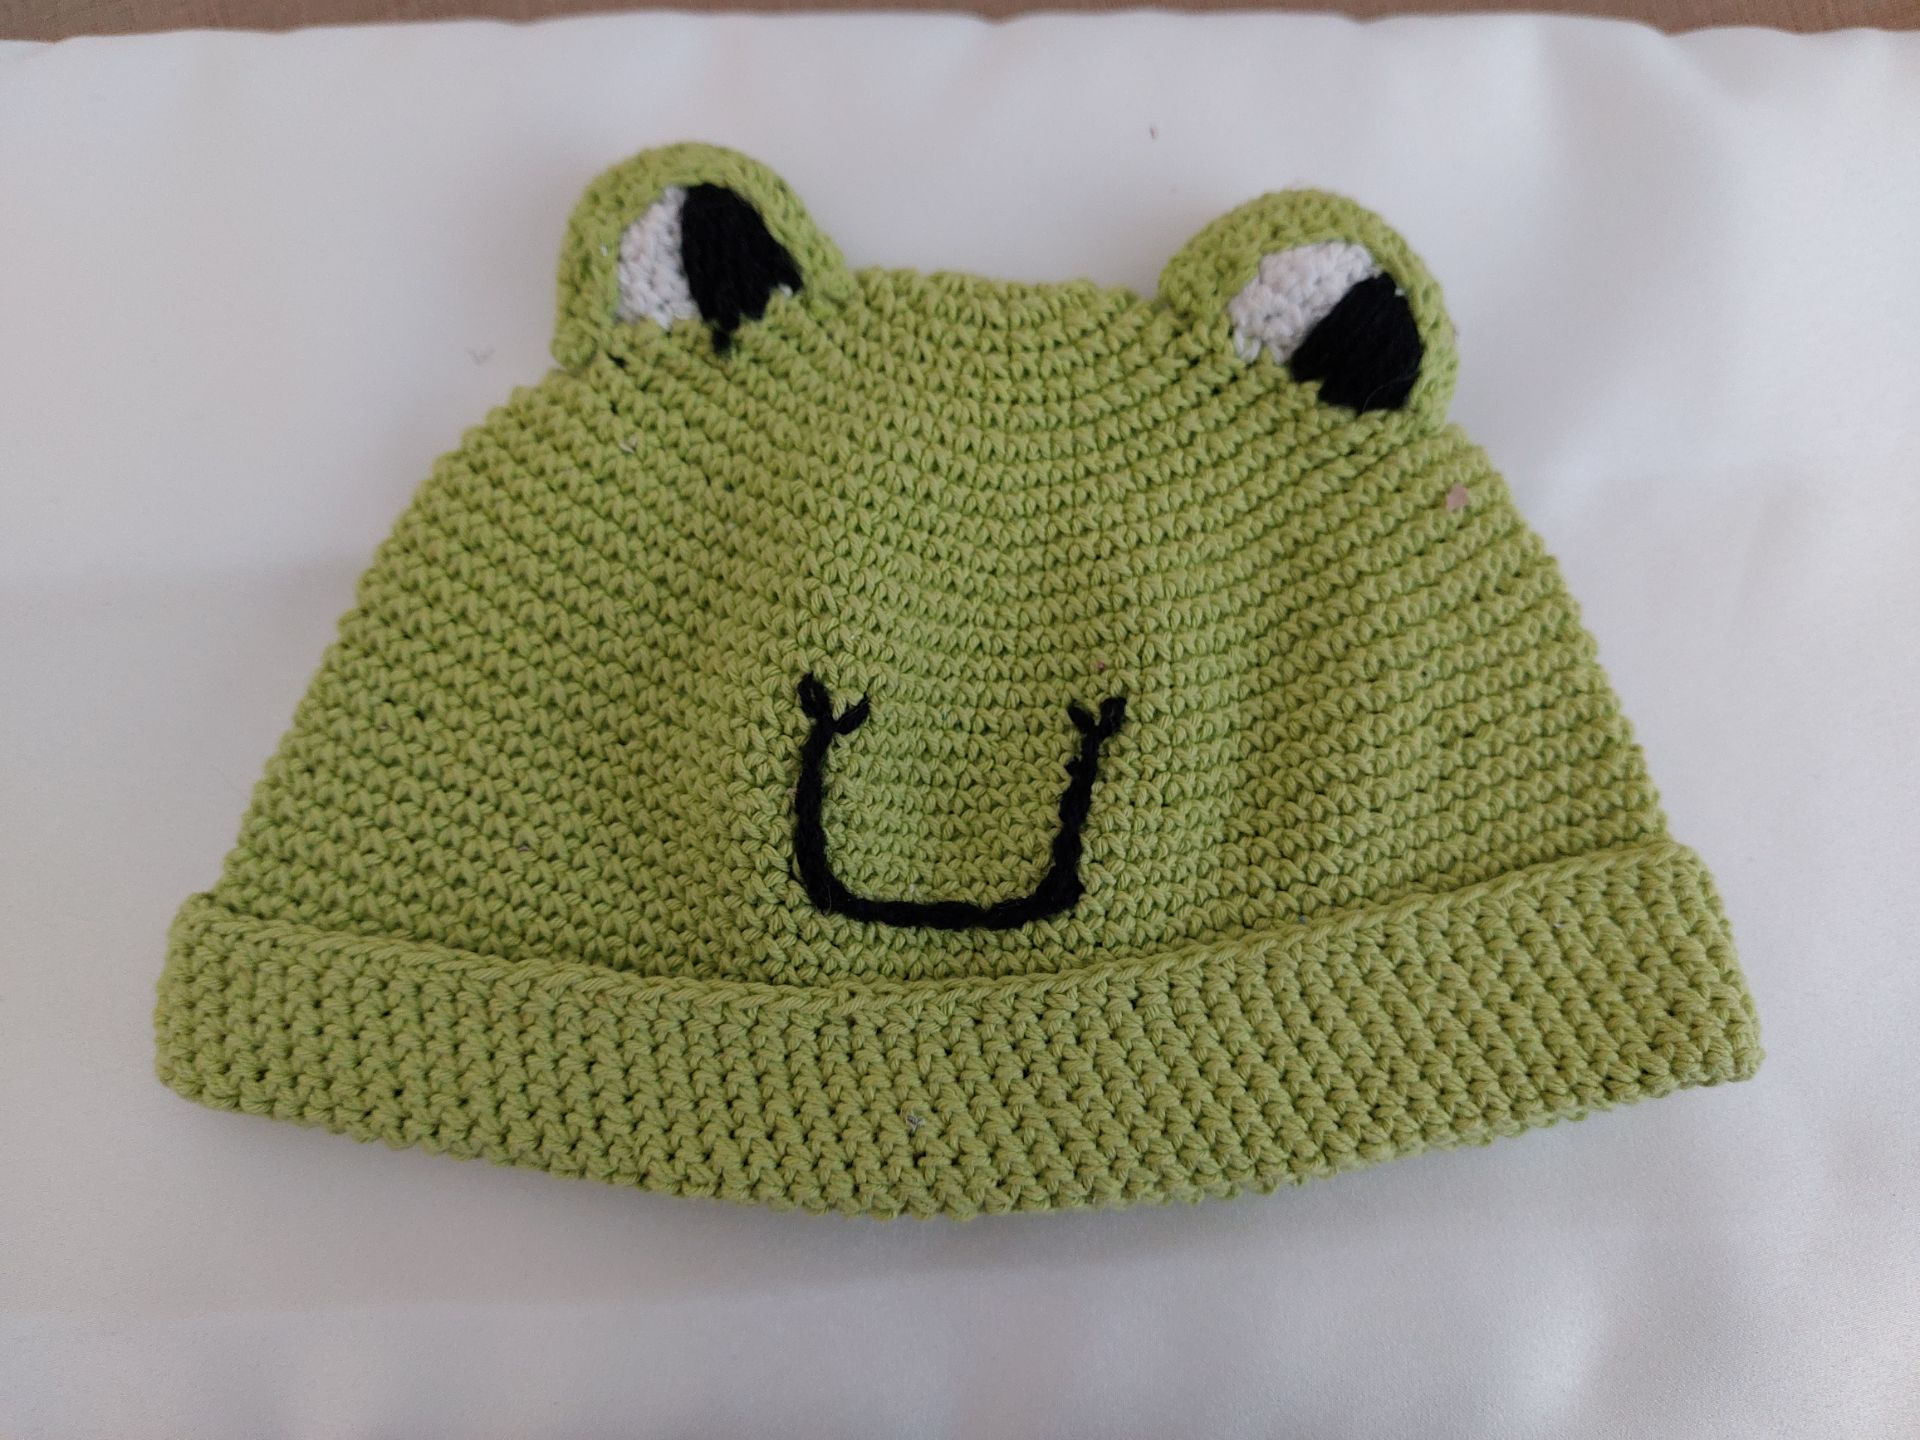 Toddler Hats Knitted Mixed x 15 - Image 4 of 4